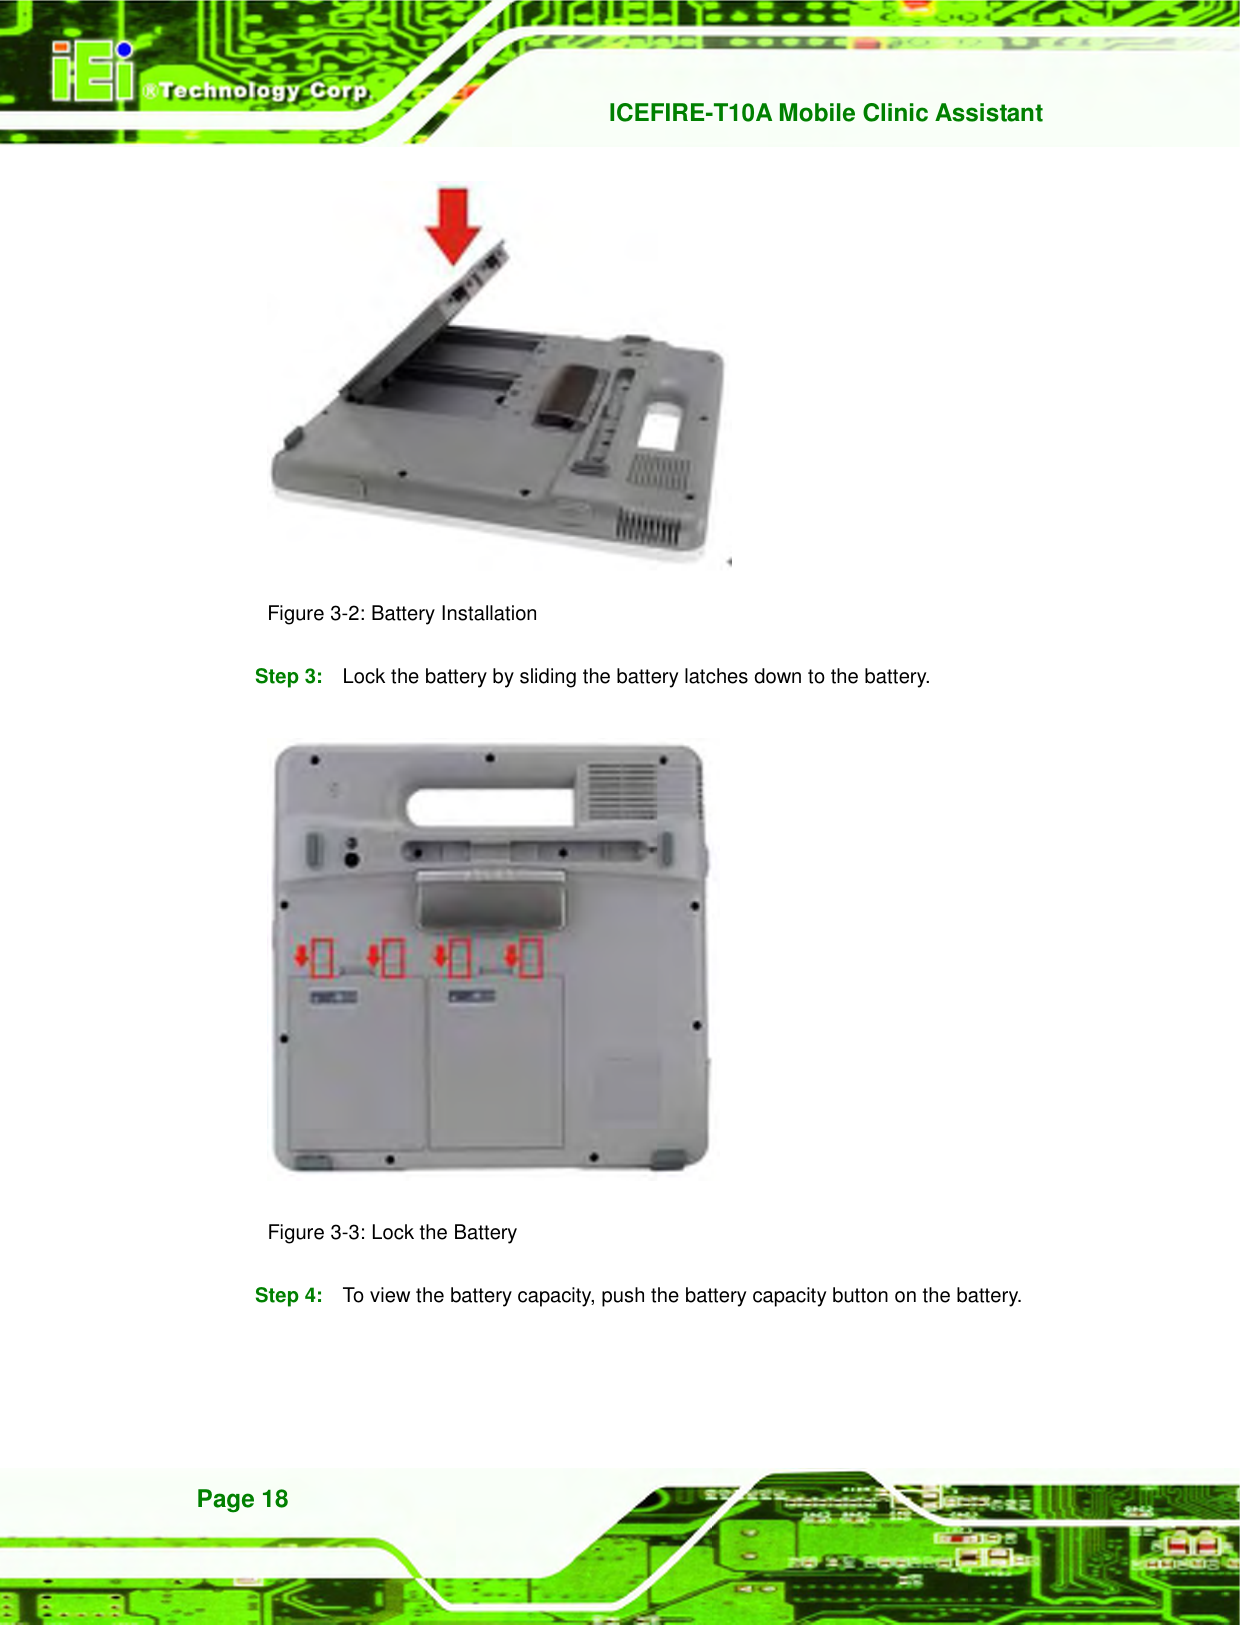   ICEFIRE-T10A Mobile Clinic Assistant Page 18  Figure 3-2: Battery Installation   Step 3:  Lock the battery by sliding the battery latches down to the battery.  Figure 3-3: Lock the Battery Step 4:  To view the battery capacity, push the battery capacity button on the battery.   